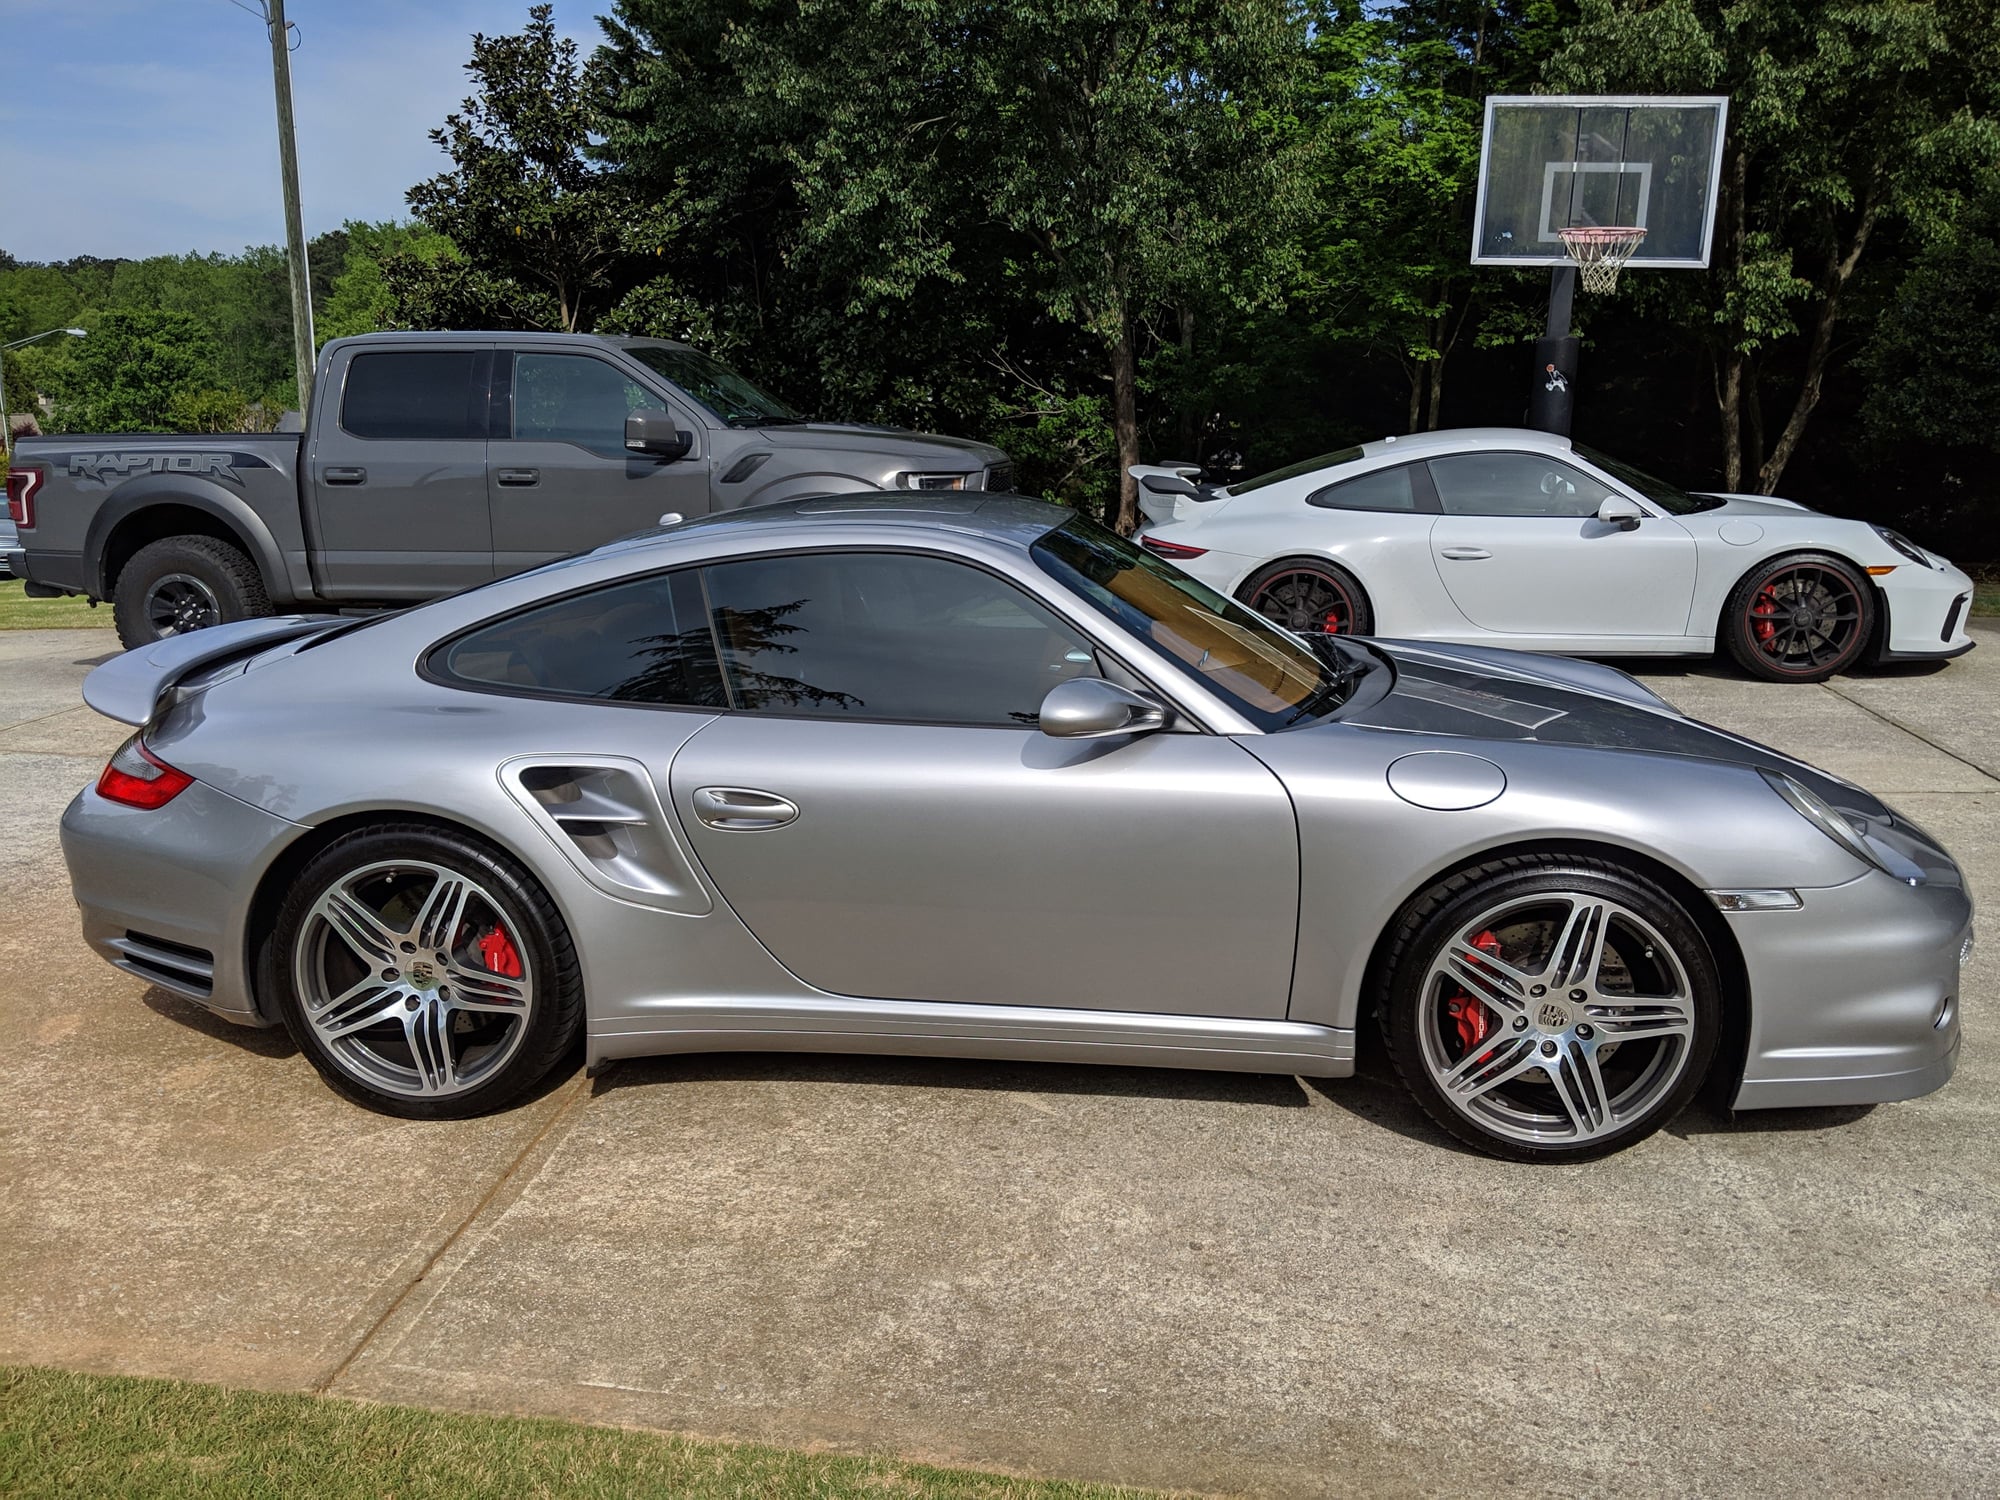 2009 Porsche 911 -  - Used - VIN WP0AD299X9S766616 - 56,800 Miles - 6 cyl - AWD - Manual - Coupe - Silver - Kennesaw, GA 30152, United States